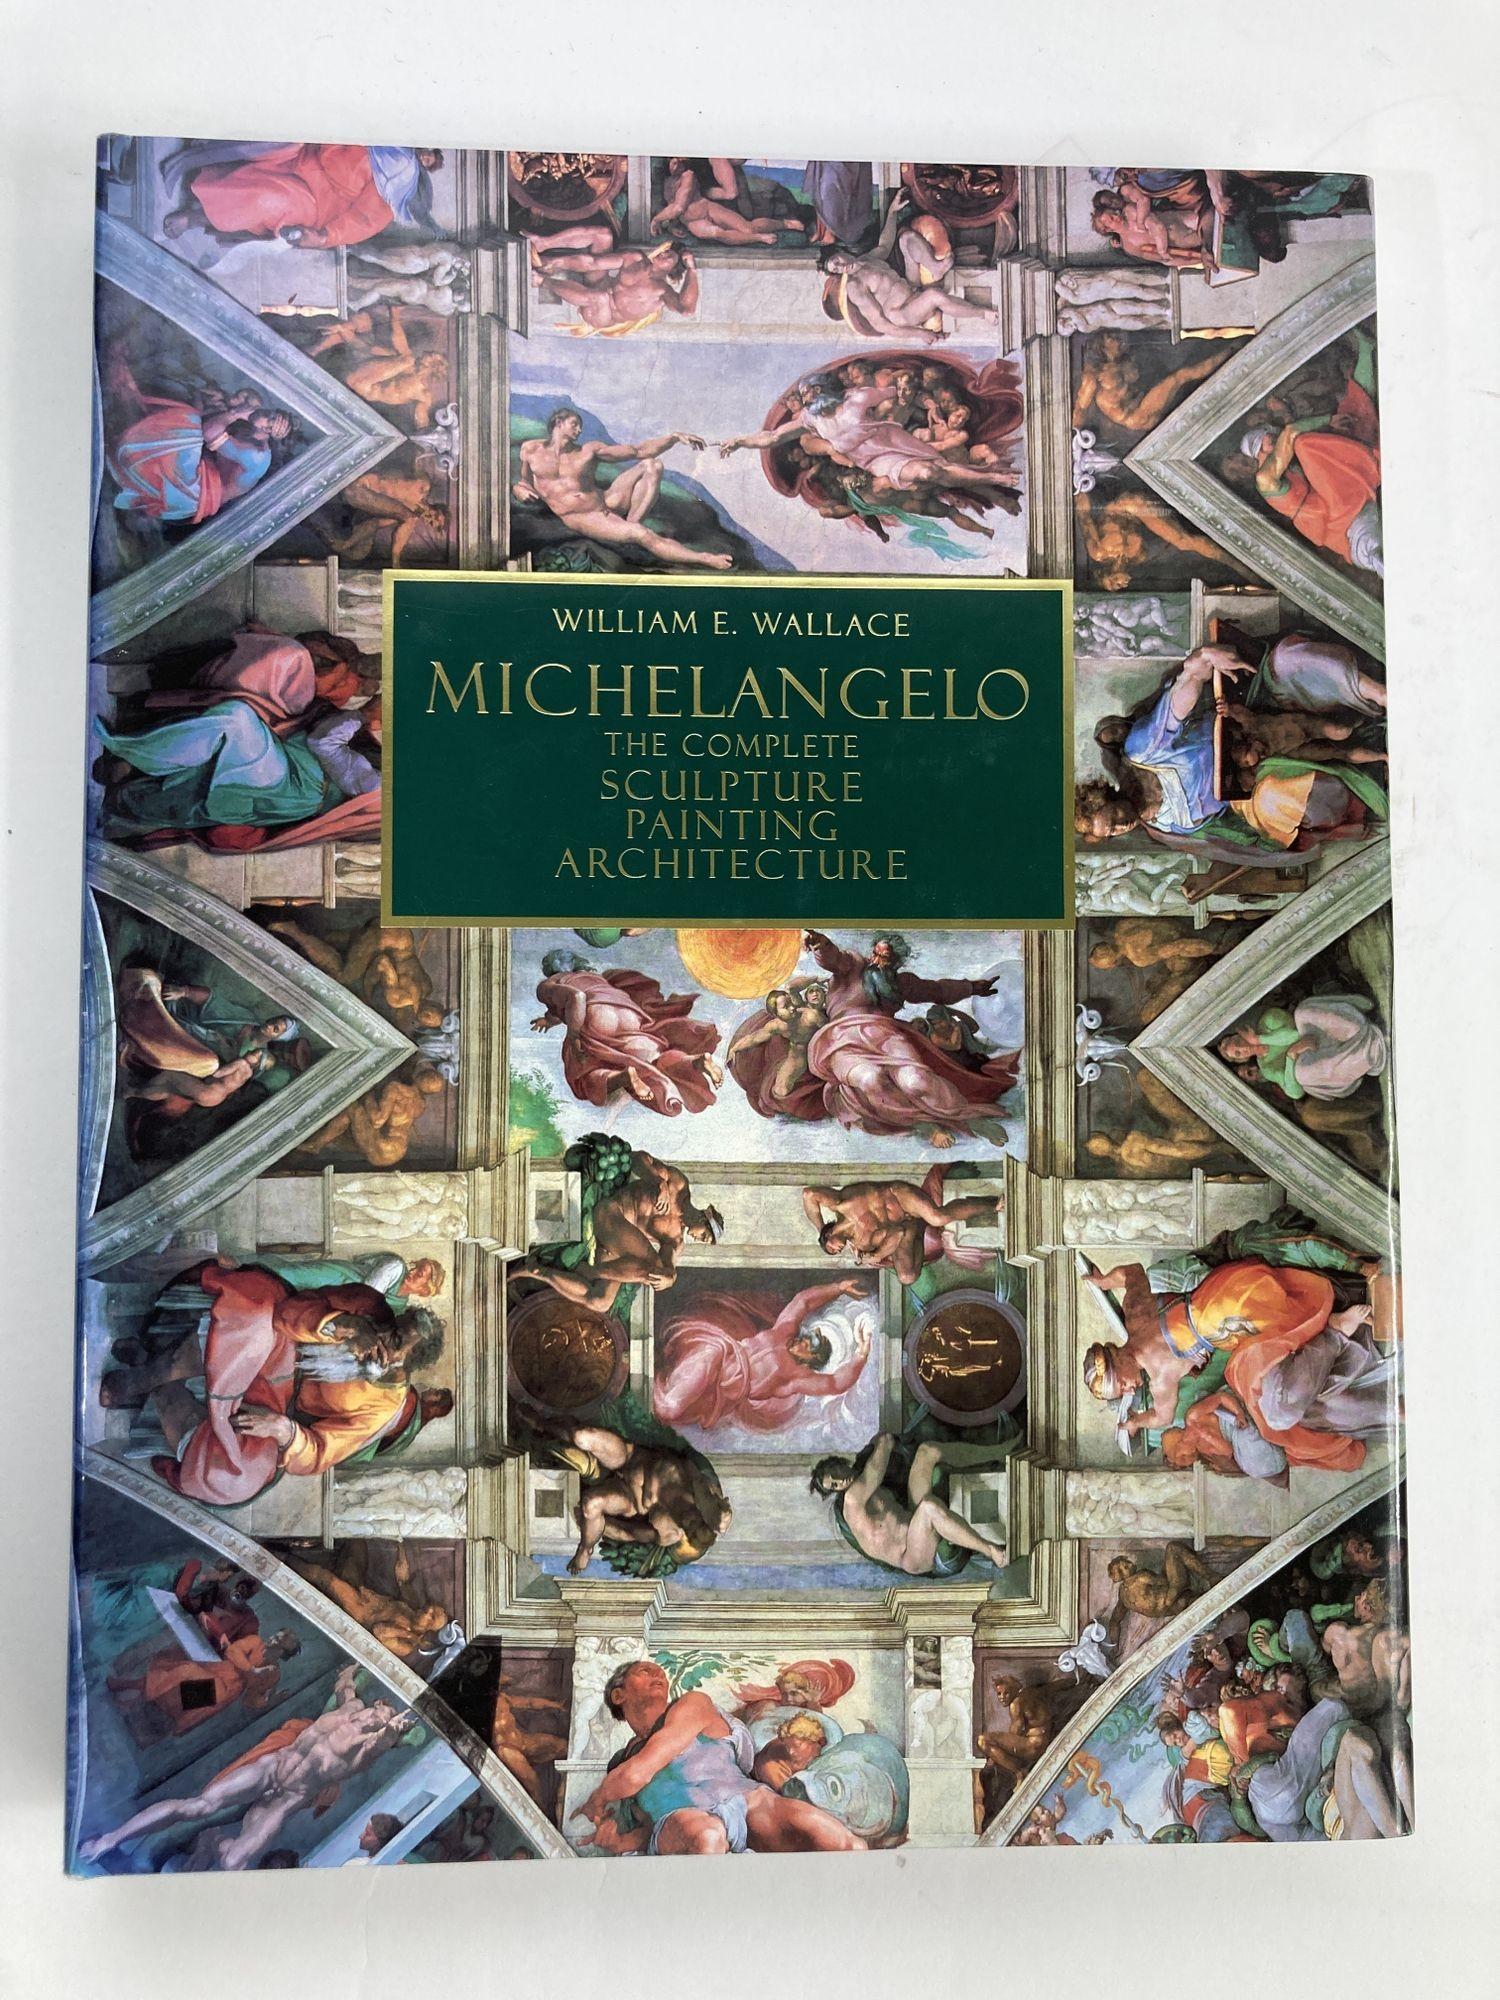 Michelangelo by William E. Wallace Hardcover Table Book The Complete Sculpture Painting and Architecture.
Easton Press Oversized Hardcover Book 1998.
With an engaging text by renowned Michelangelo scholar William E. Wallace, 